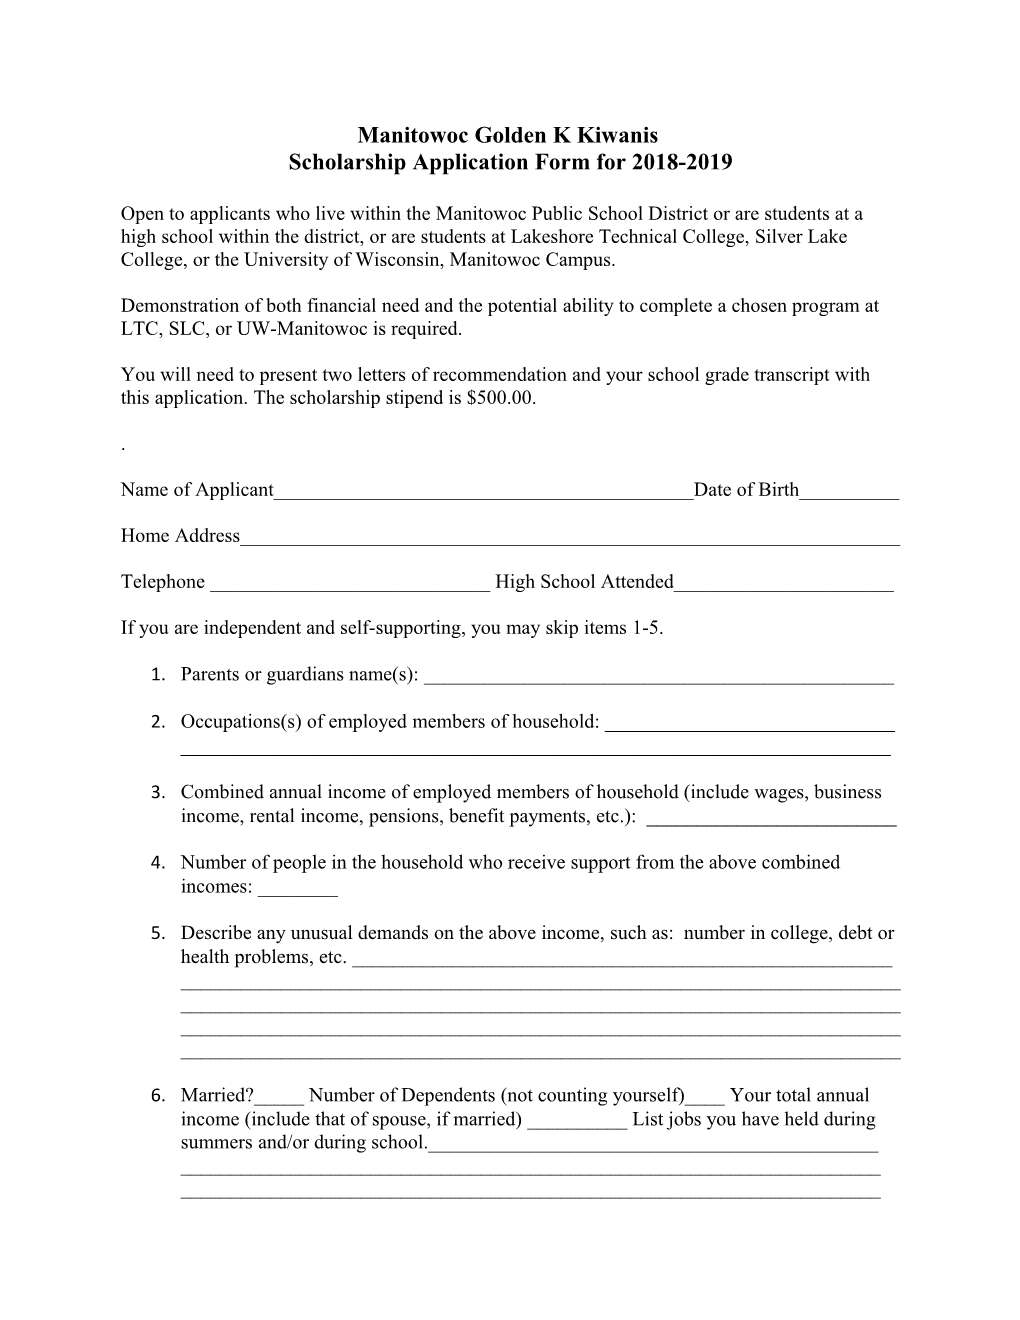 Scholarship Application Form for 2018-2019